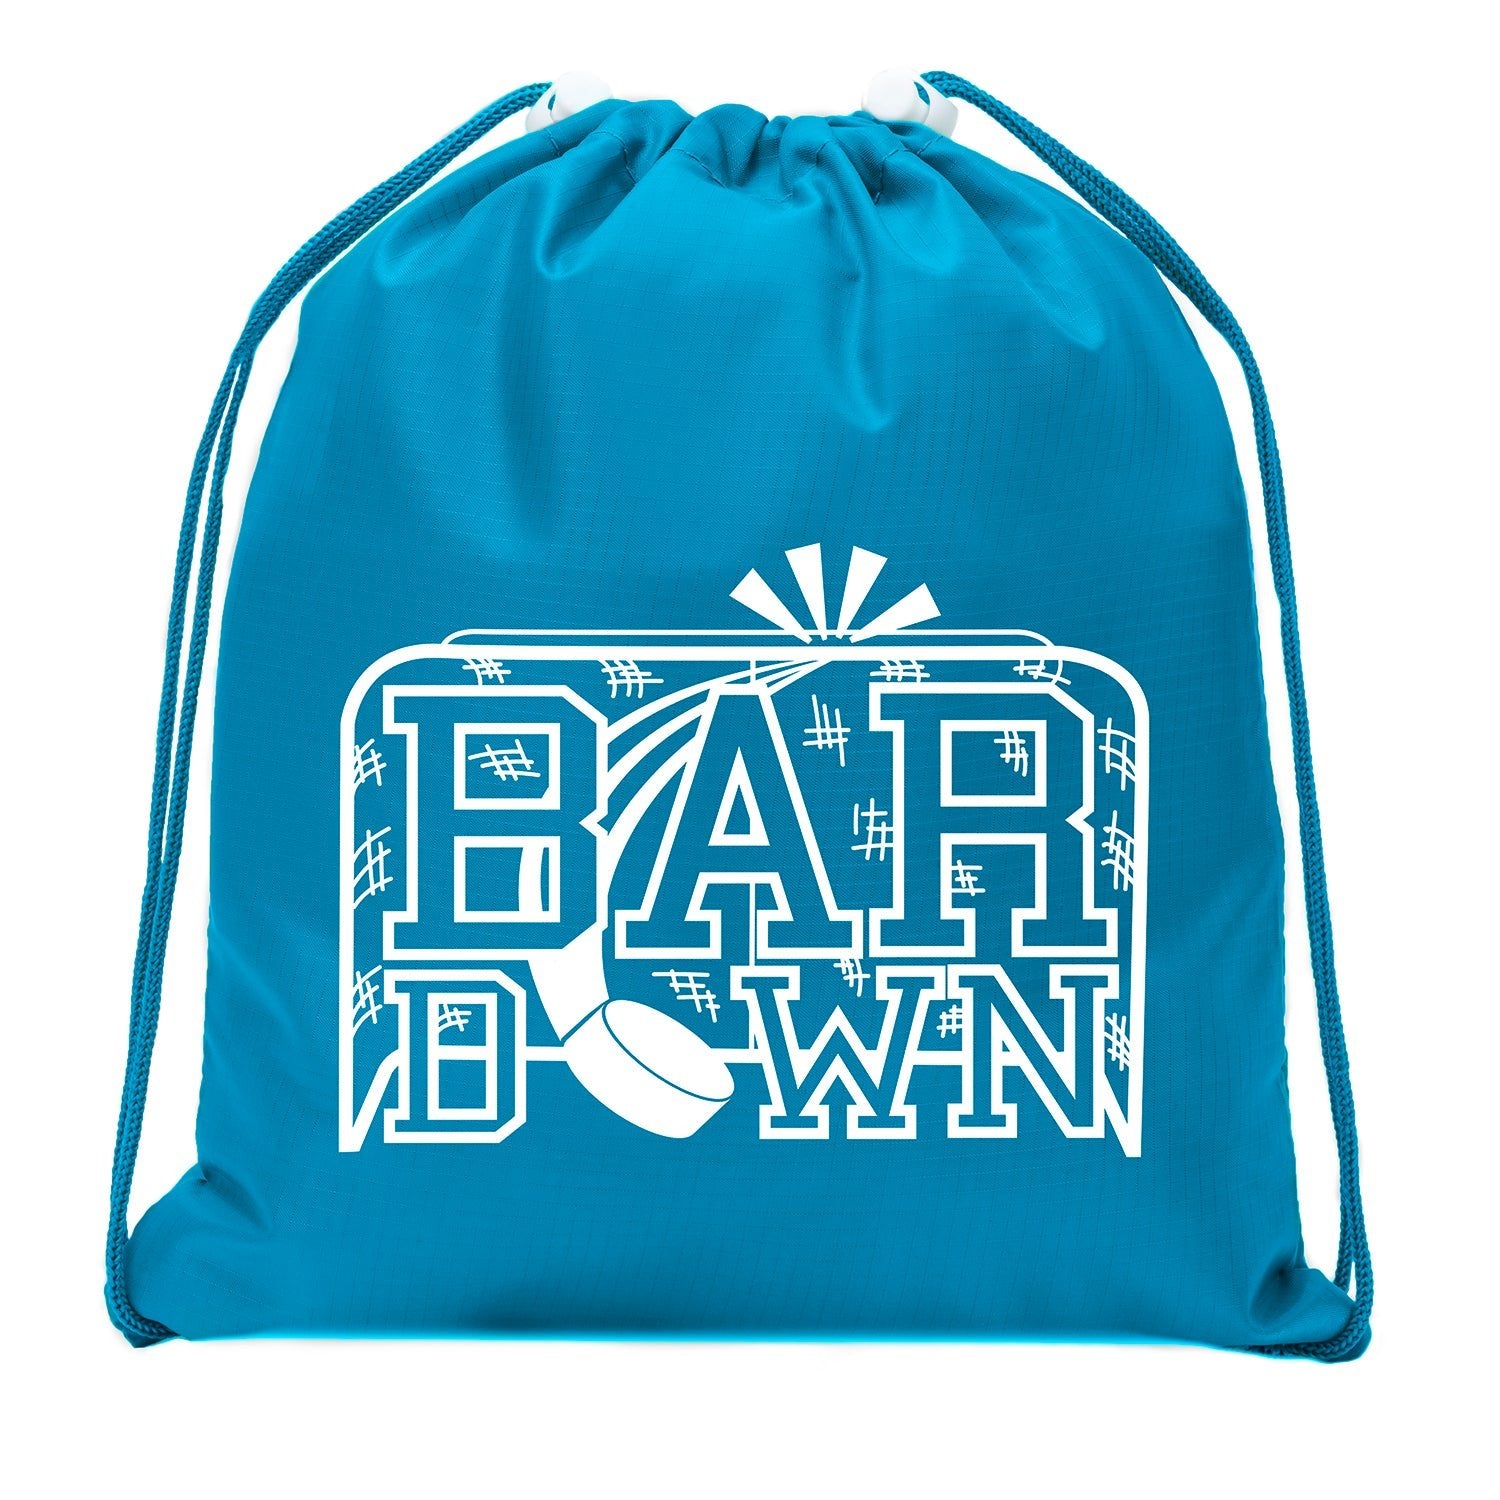 Accessory - Mini Hockey Drawstring Bags | Mini Gift Bags For Parties, Teams, And Promotional Events! - Bar Down